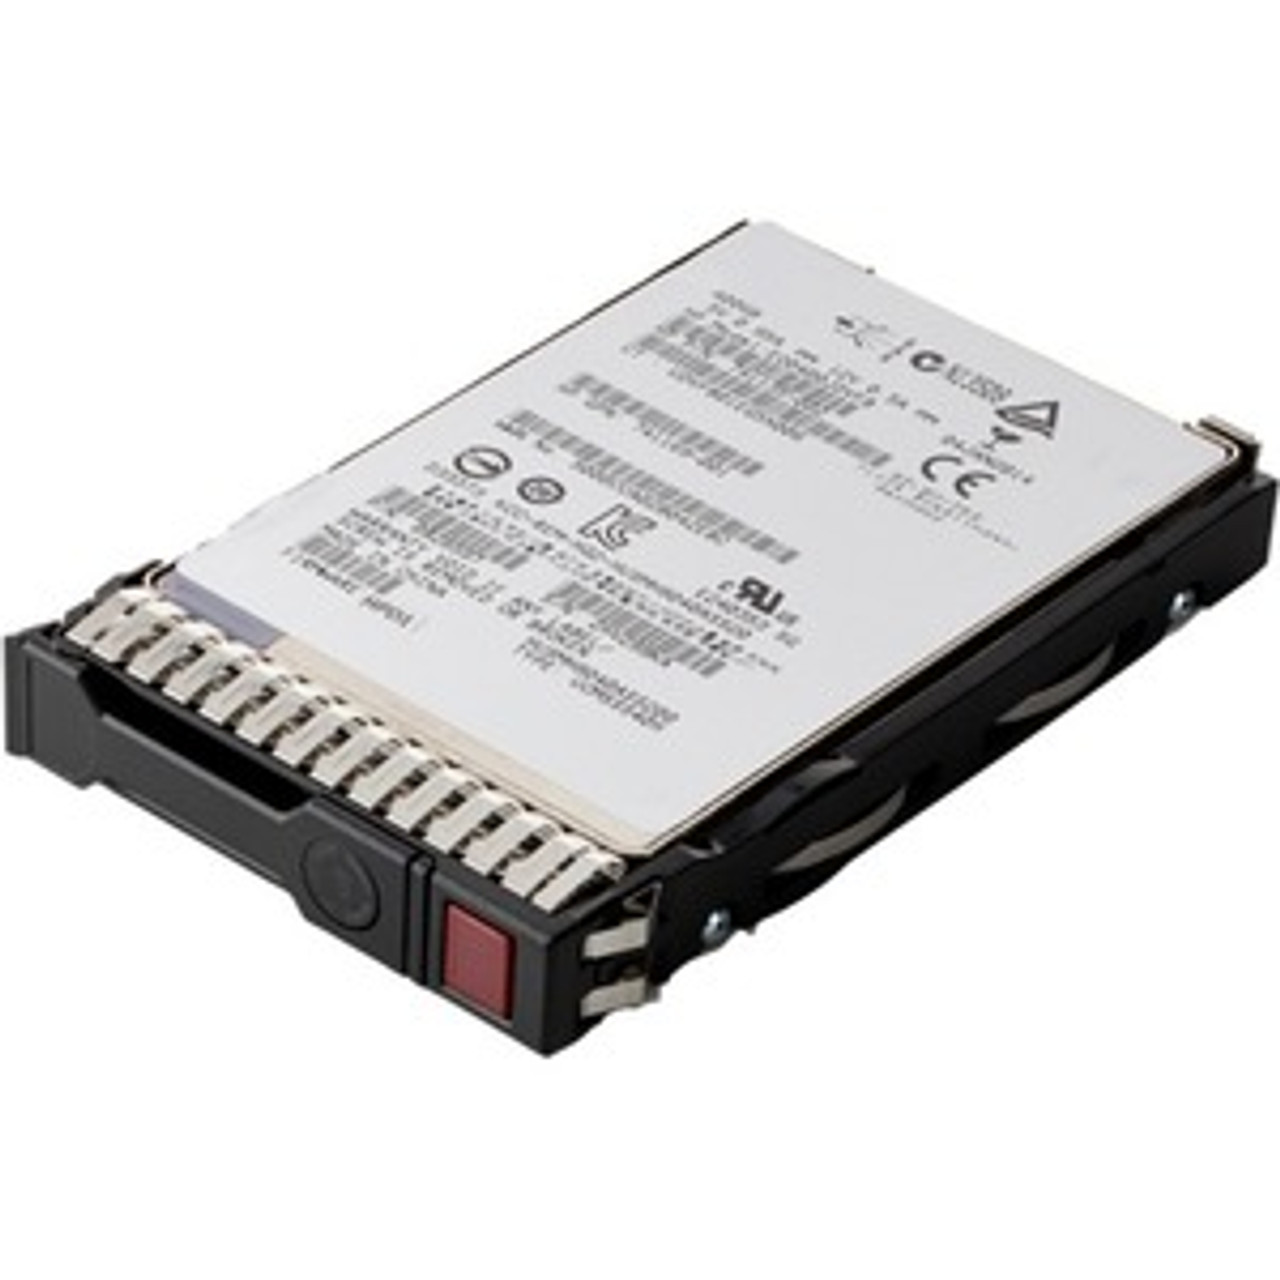 P05976-H21#0D1 HPE 480GB SATA 6Gbps Mixed Use 2.5-inch Internal Solid State Drive (SSD)